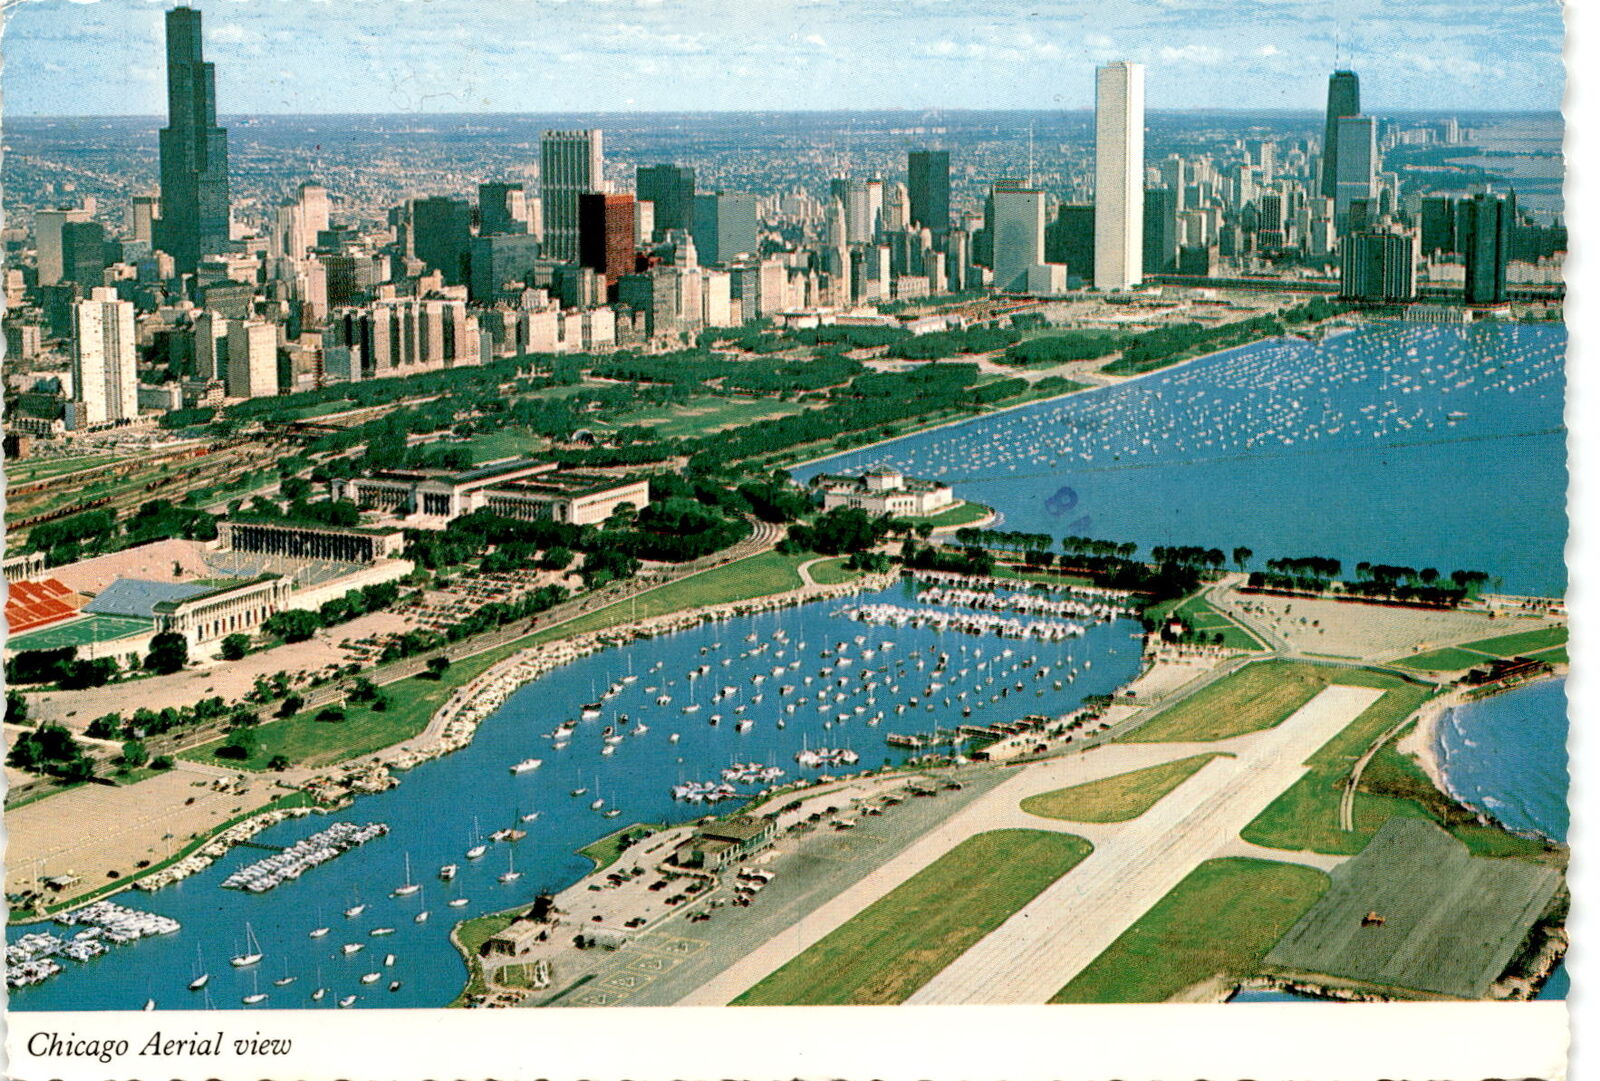 Chicago, aerial view, Meig's Field, Lake Michigan, tallest buildings, Postcard